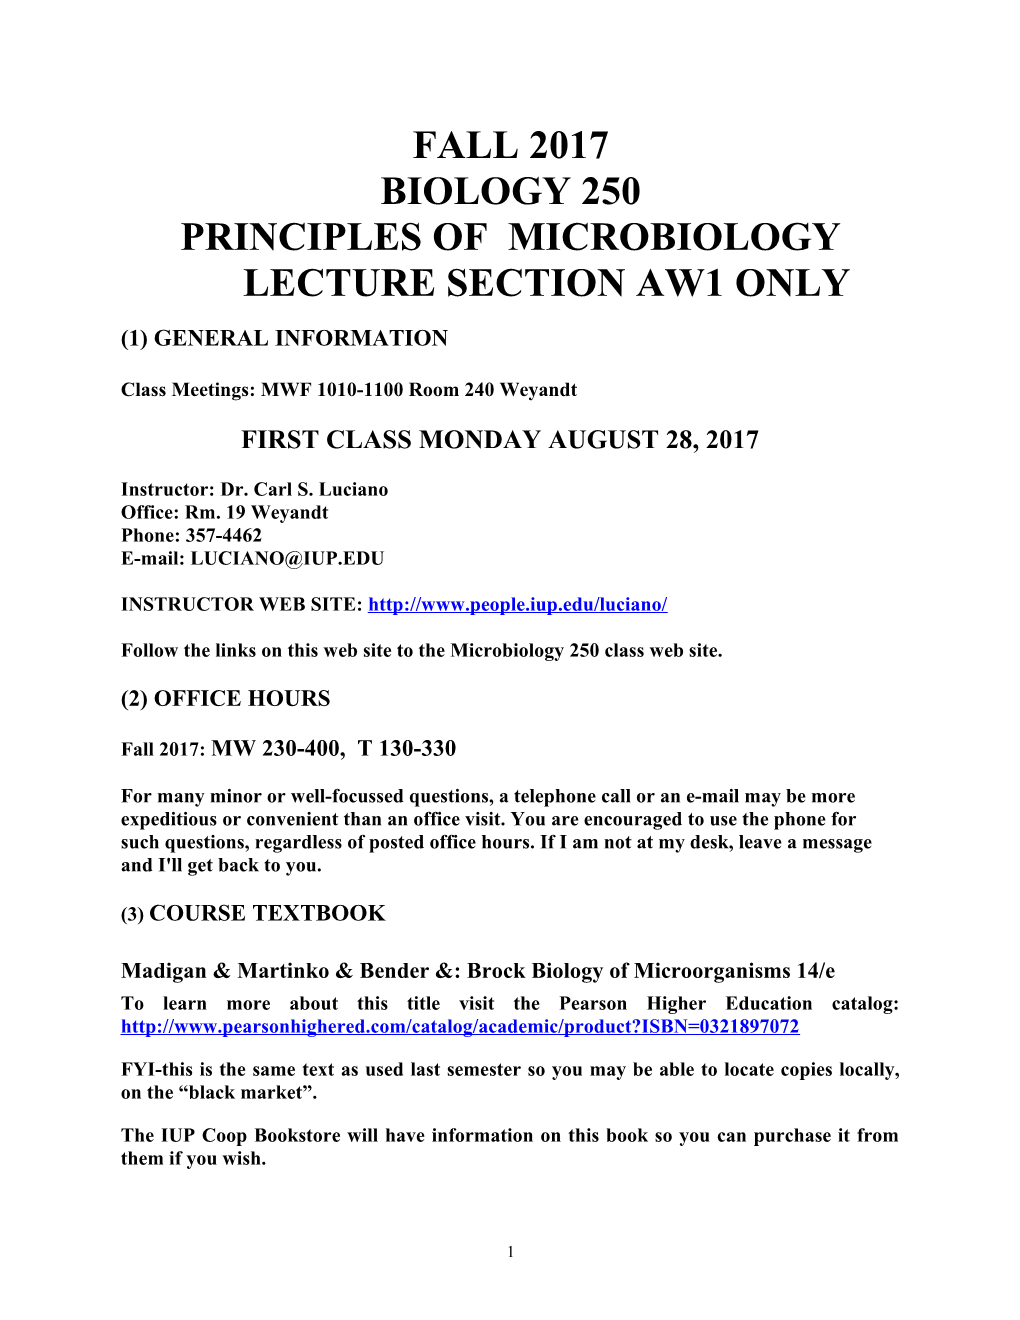 Principles of Microbiology Lecture Section Aw1 Only